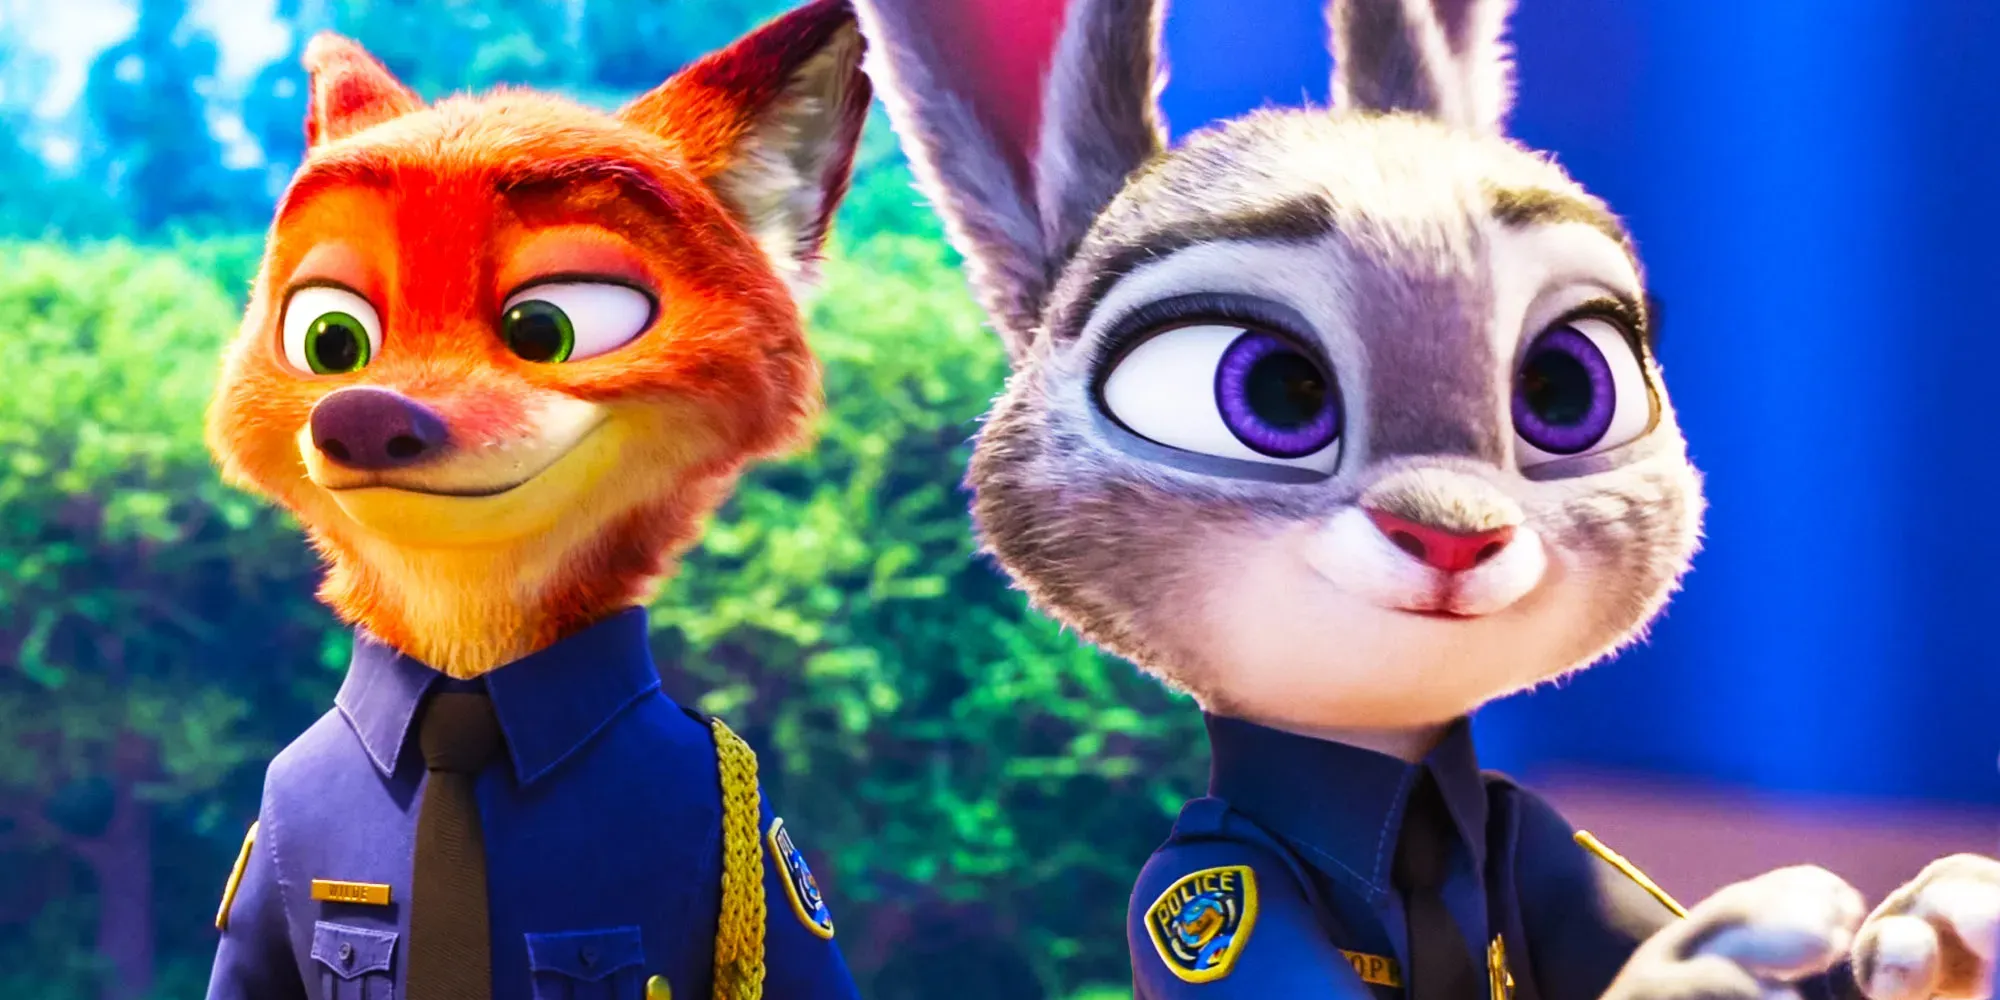 A Family Finally Sits Down To Watch Zootopia Together